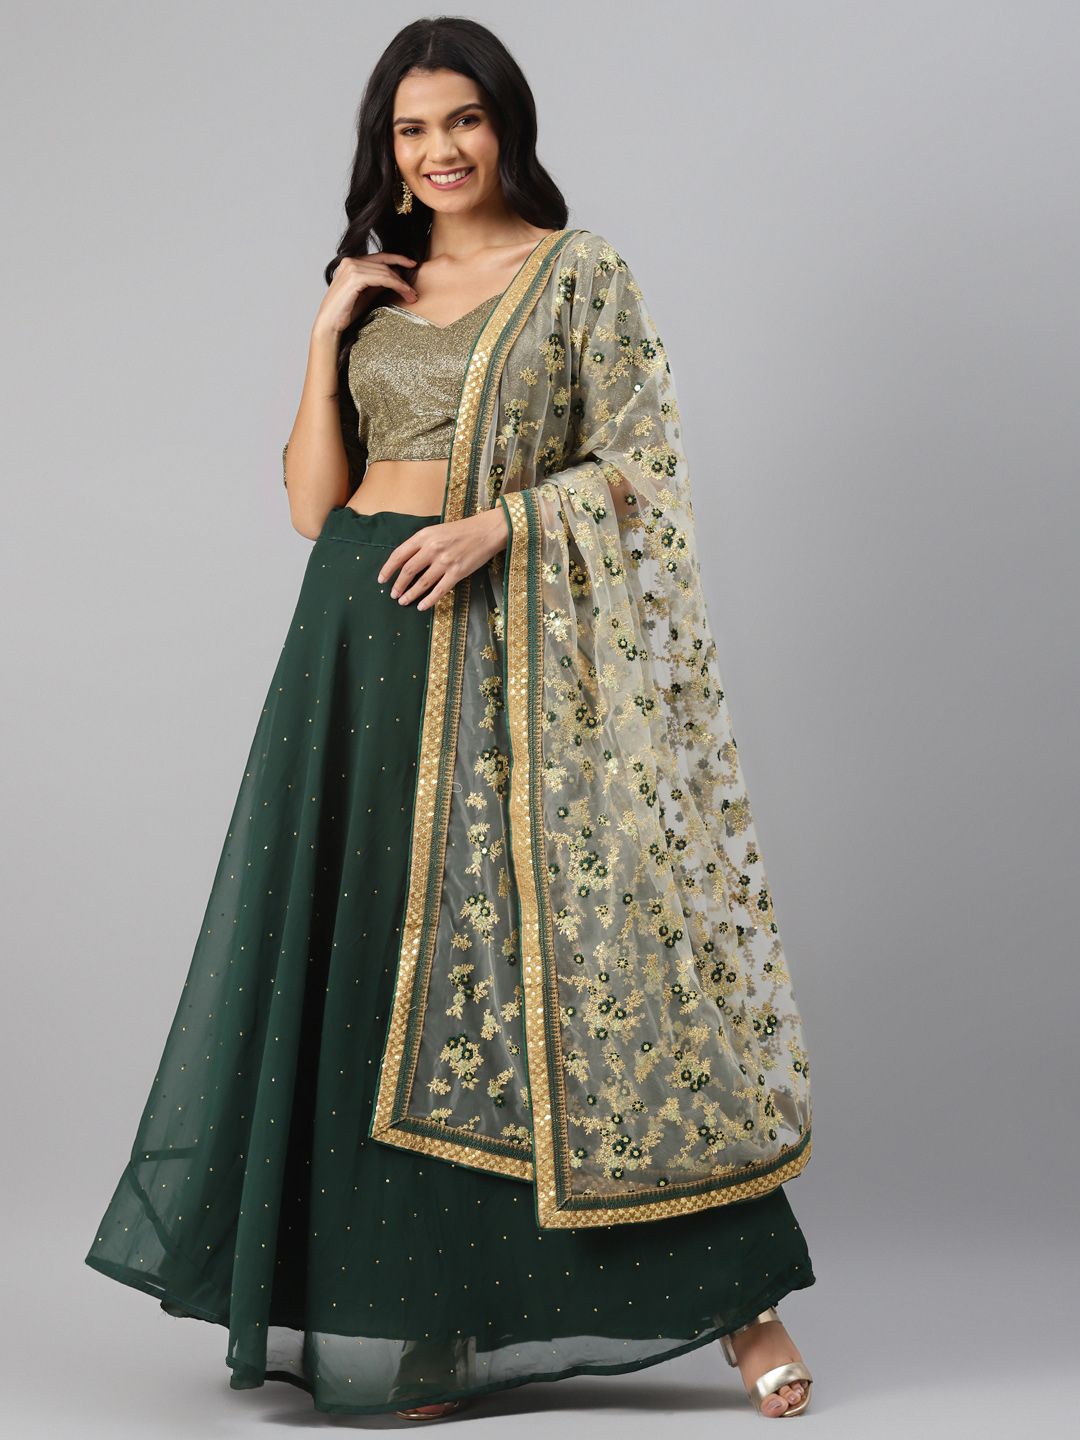 Readiprint Fashions Green & Gold-Toned Woven Design Semi-Stitched Lehenga & Unstitched Blouse with Dupatta Price in India